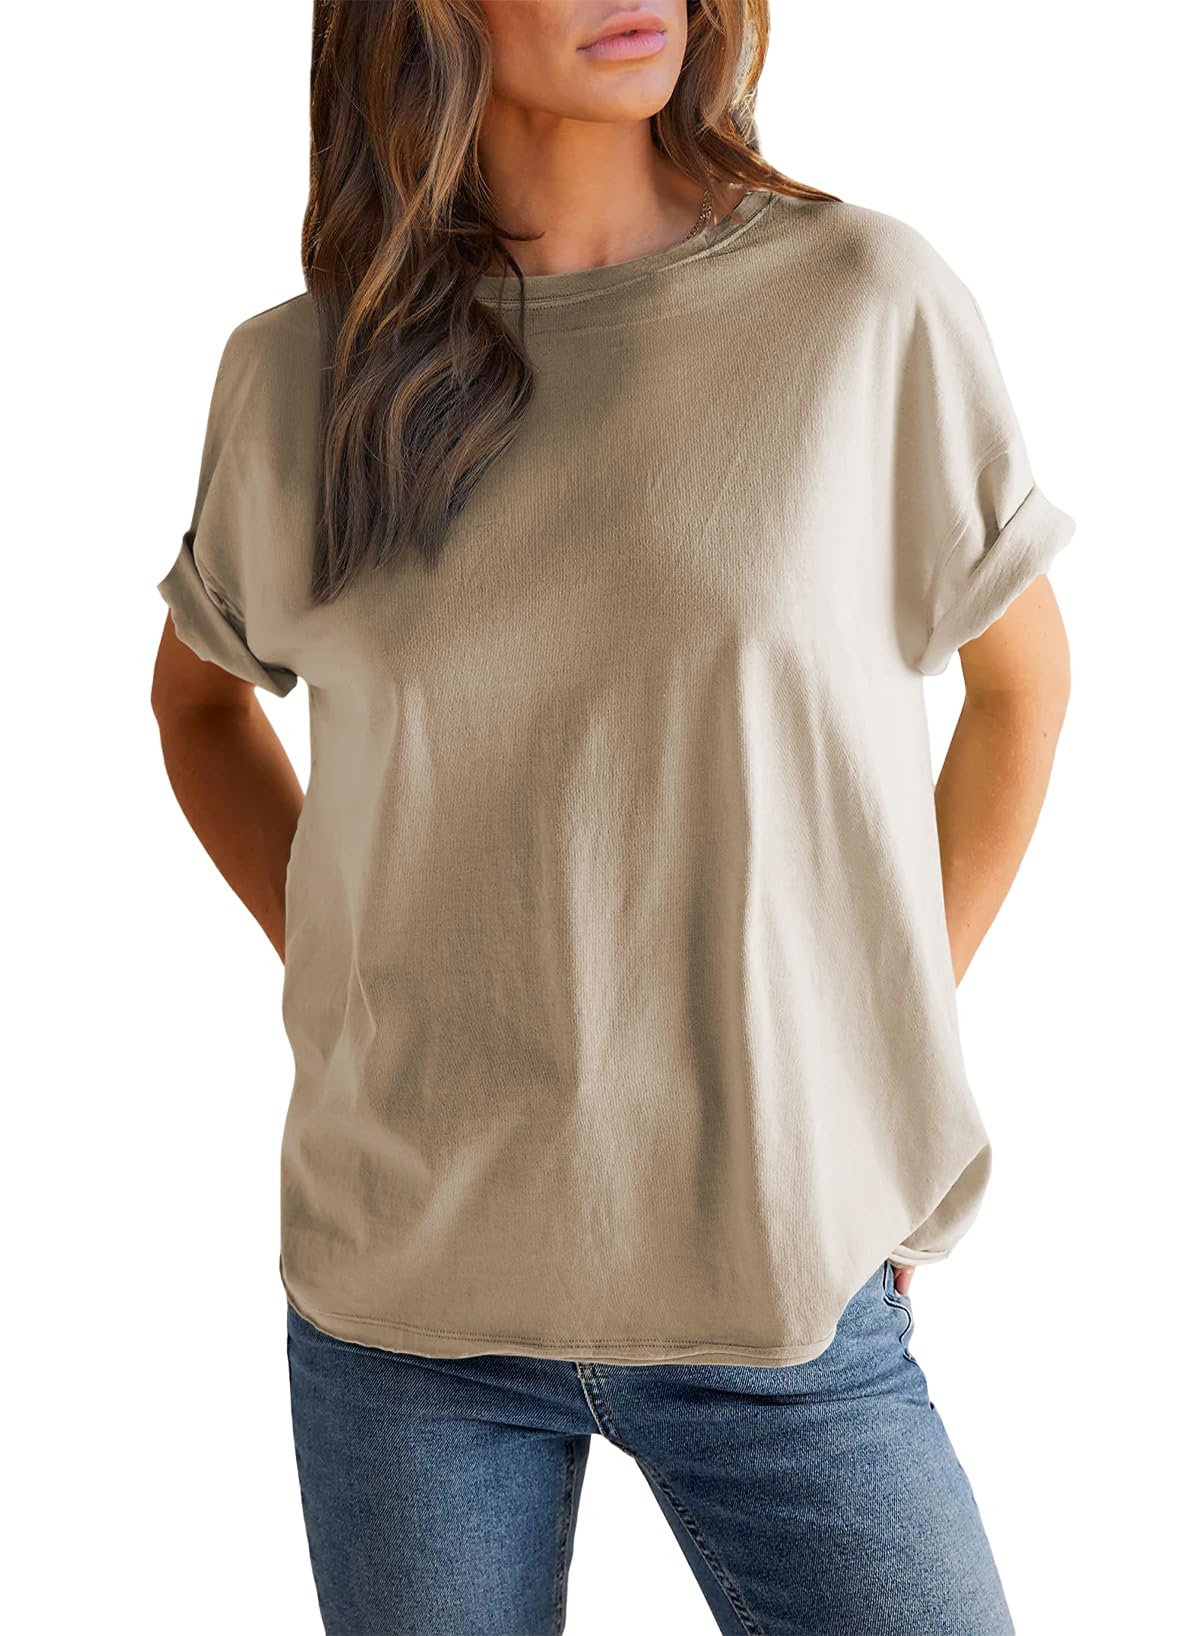 Round neck solid color short sleeve back spliced T-shirt cotton tee